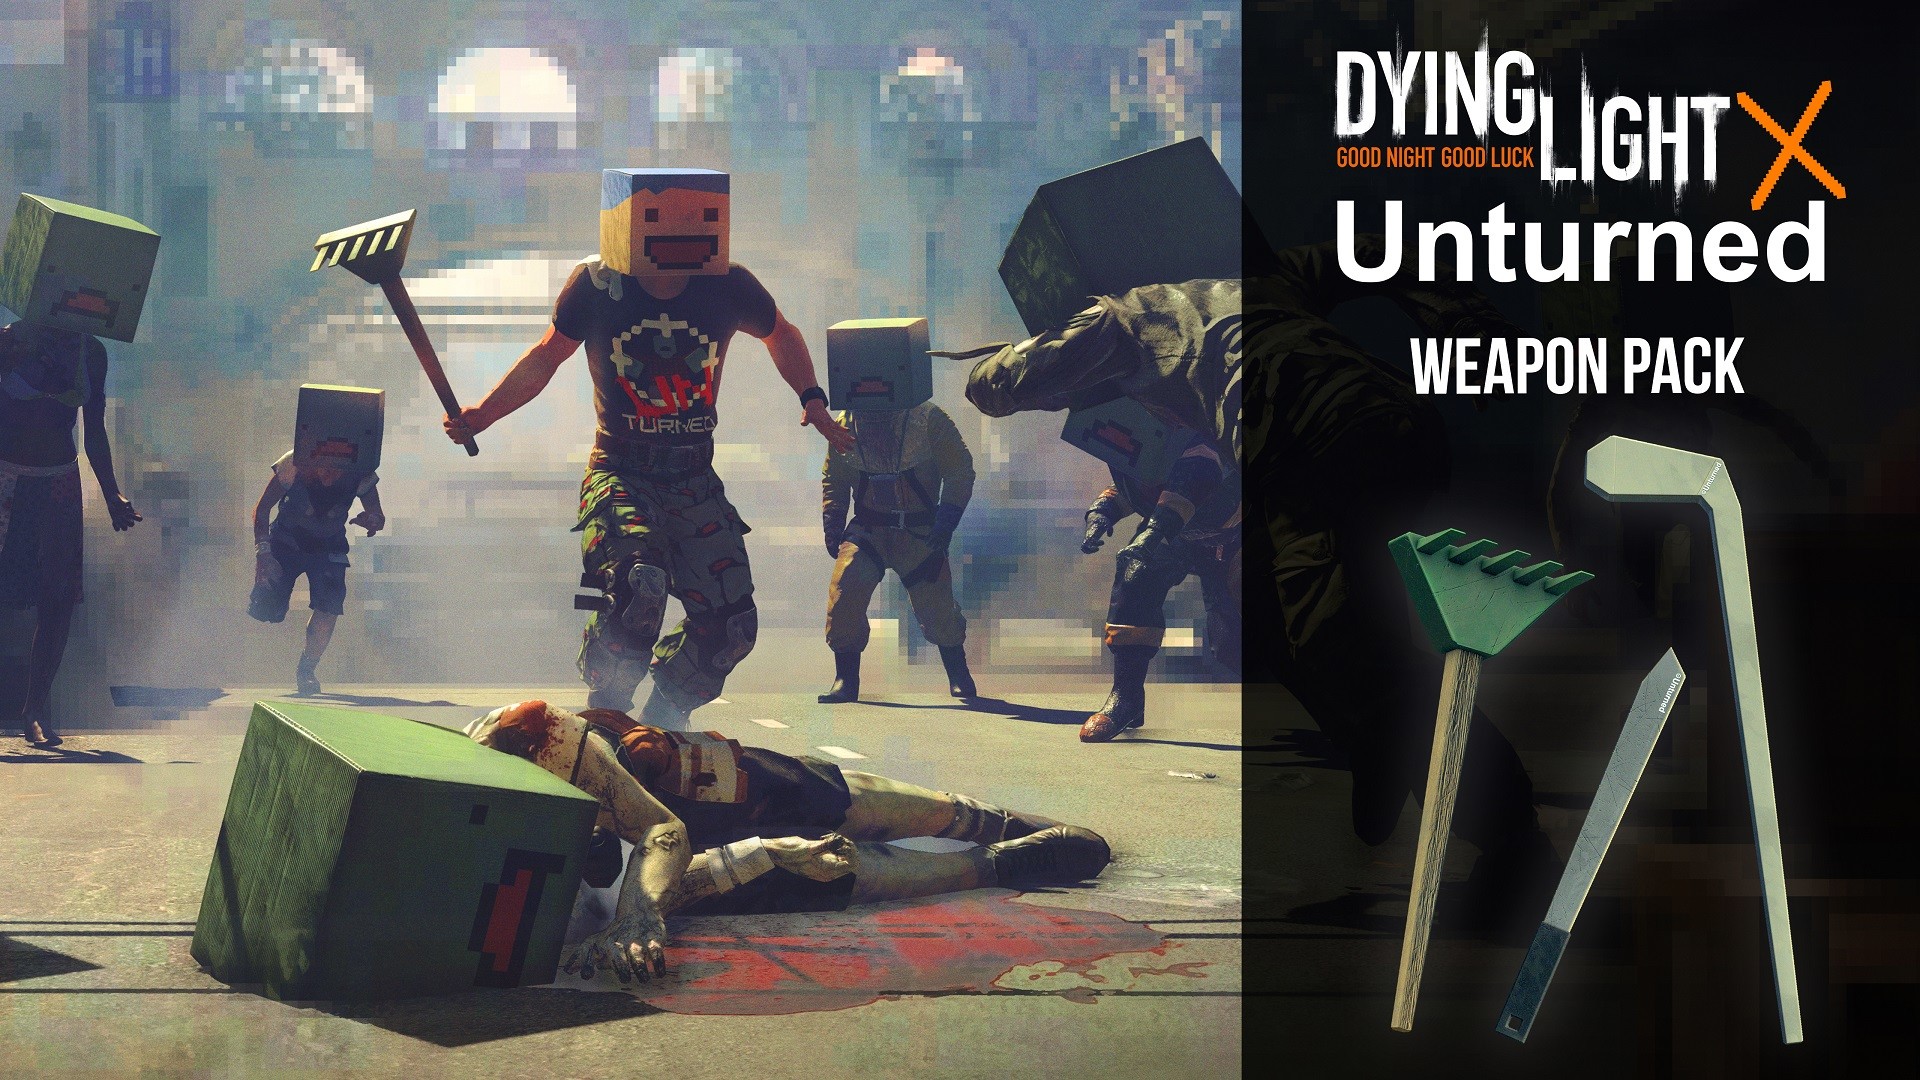 Dying Light - Unturned Weapon Pack Featured Screenshot #1